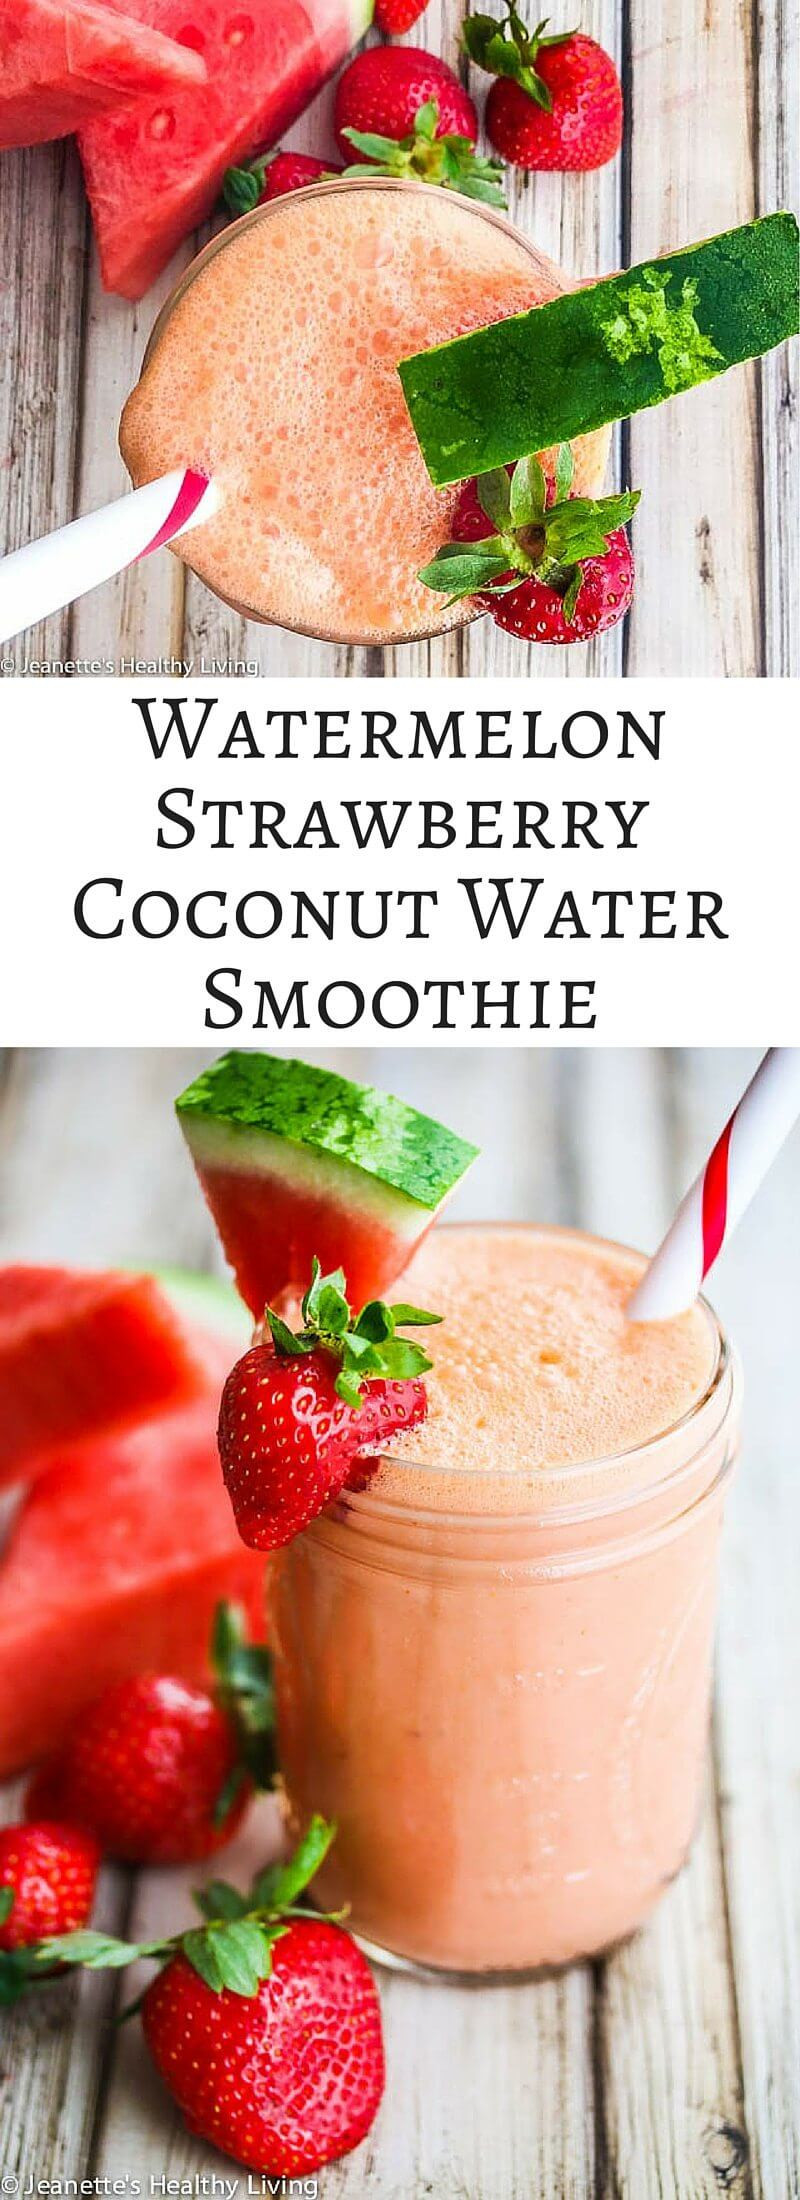 Coconut Water Smoothies Recipe
 coconut water strawberry smoothie